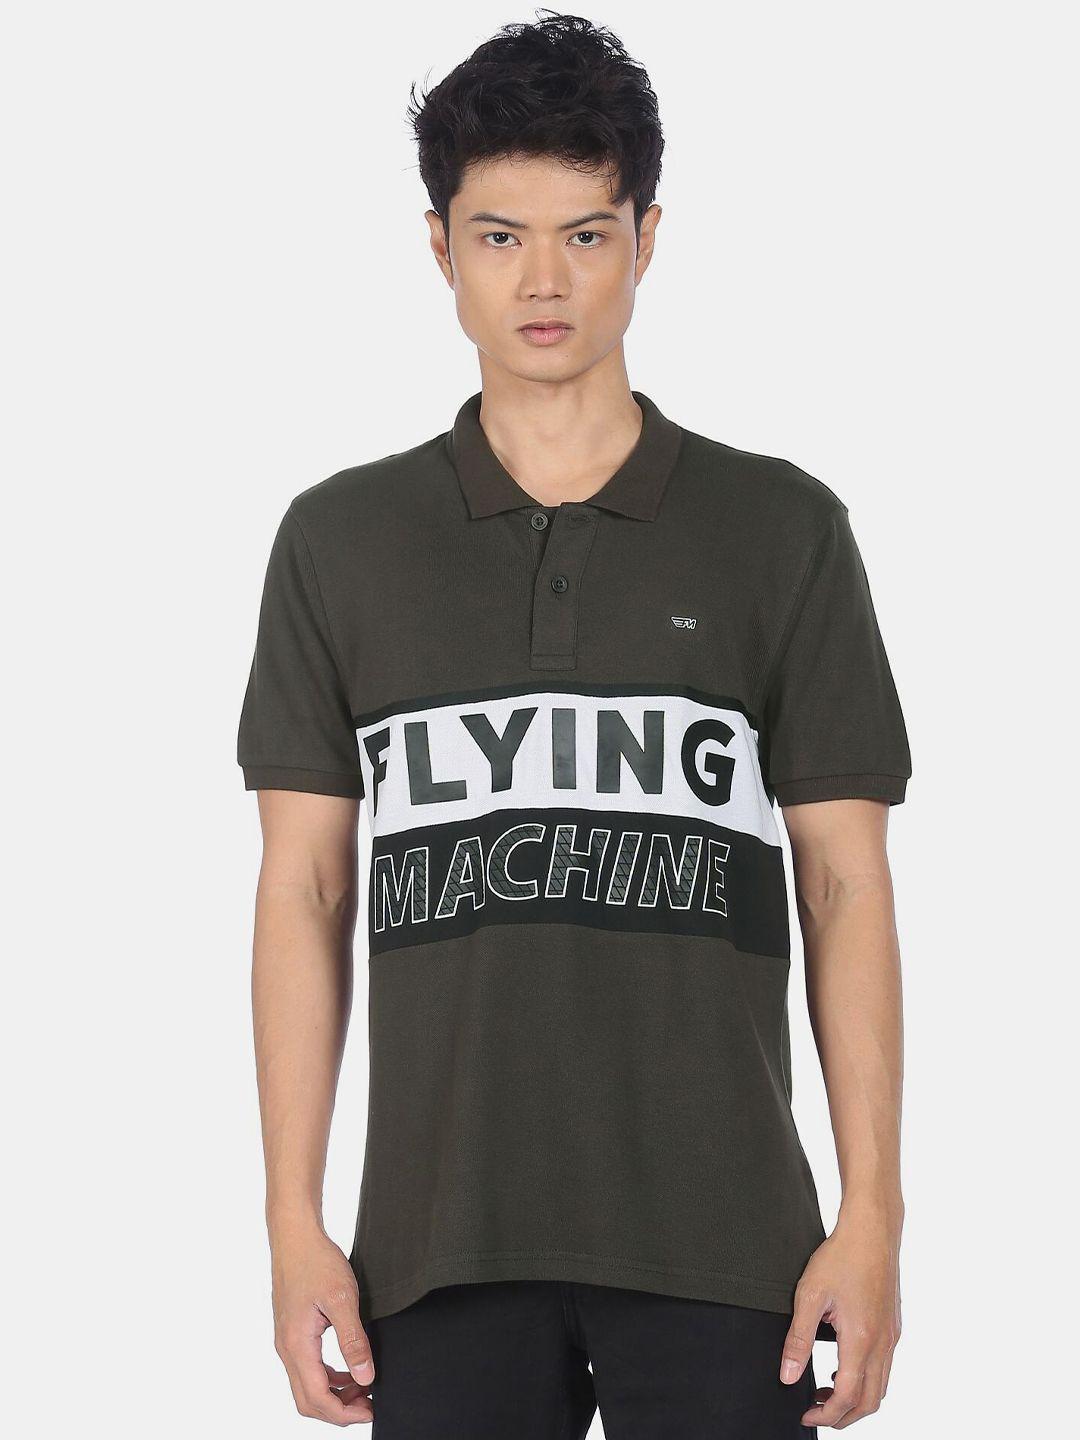 flying machine men plus size charcoal grey  & white typography printed cotton t-shirt